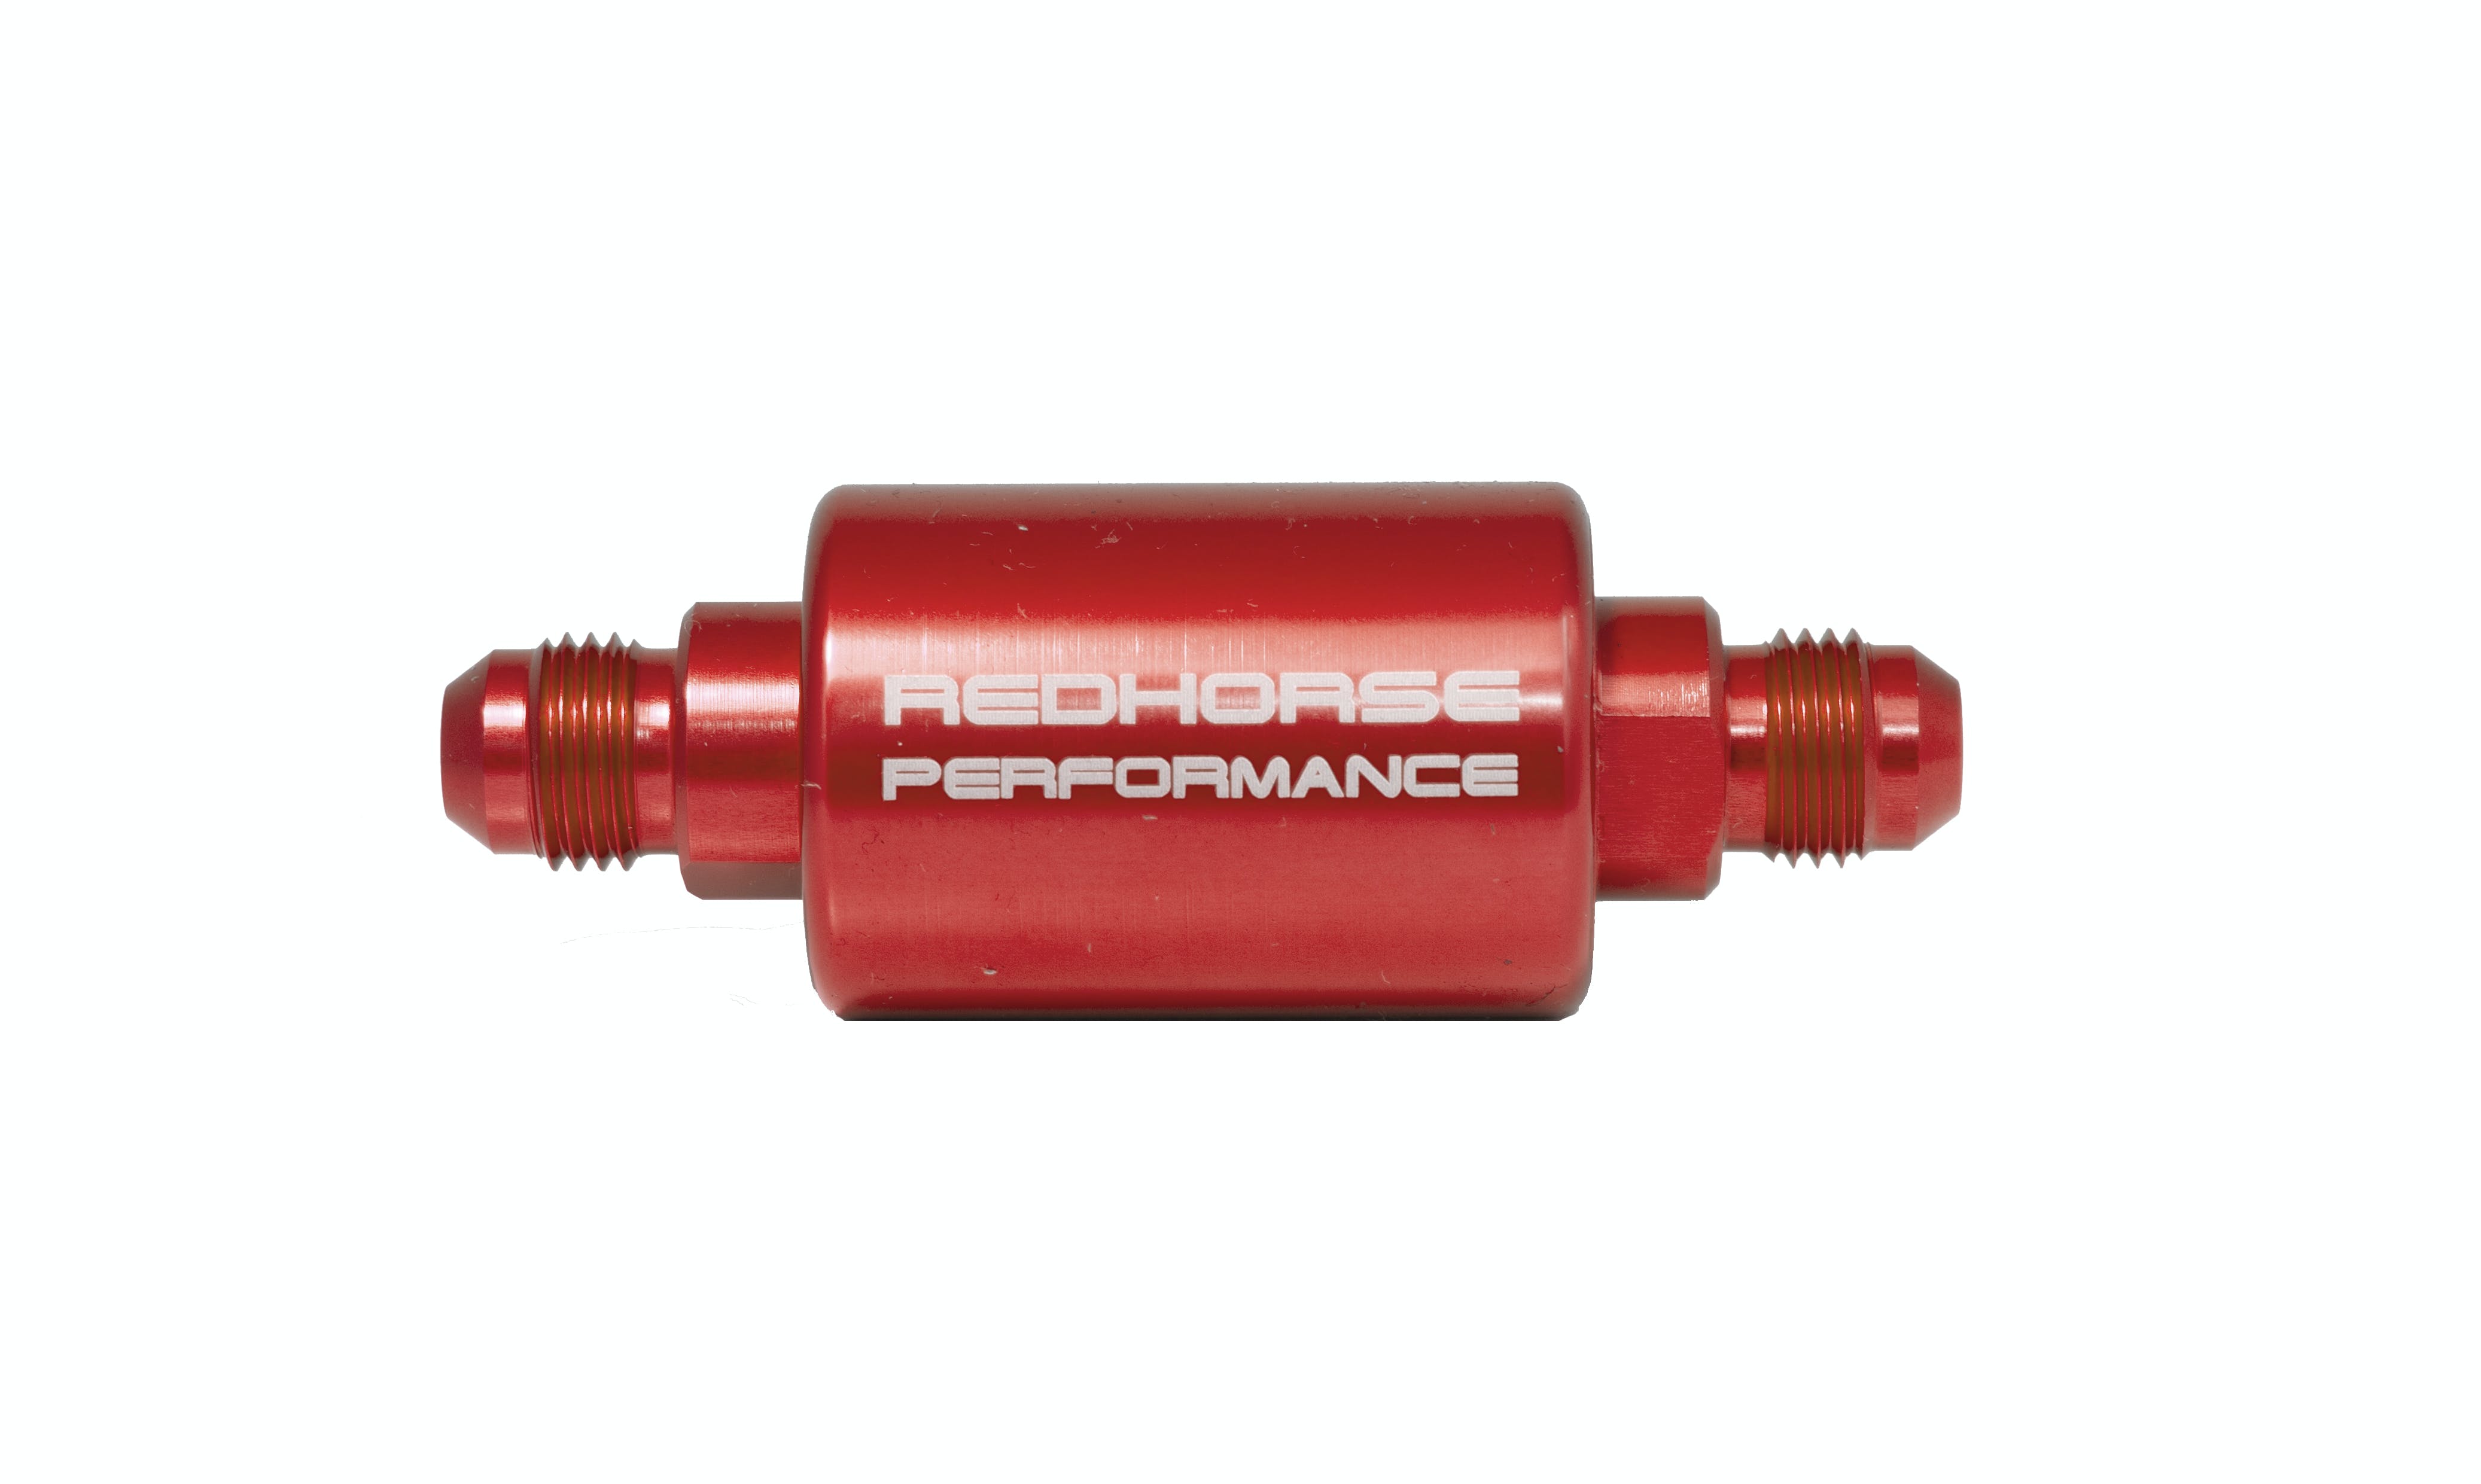 Redhorse Performance 4151-06-3 -06 inlet -06 outlet AN high flow fuel filter - red